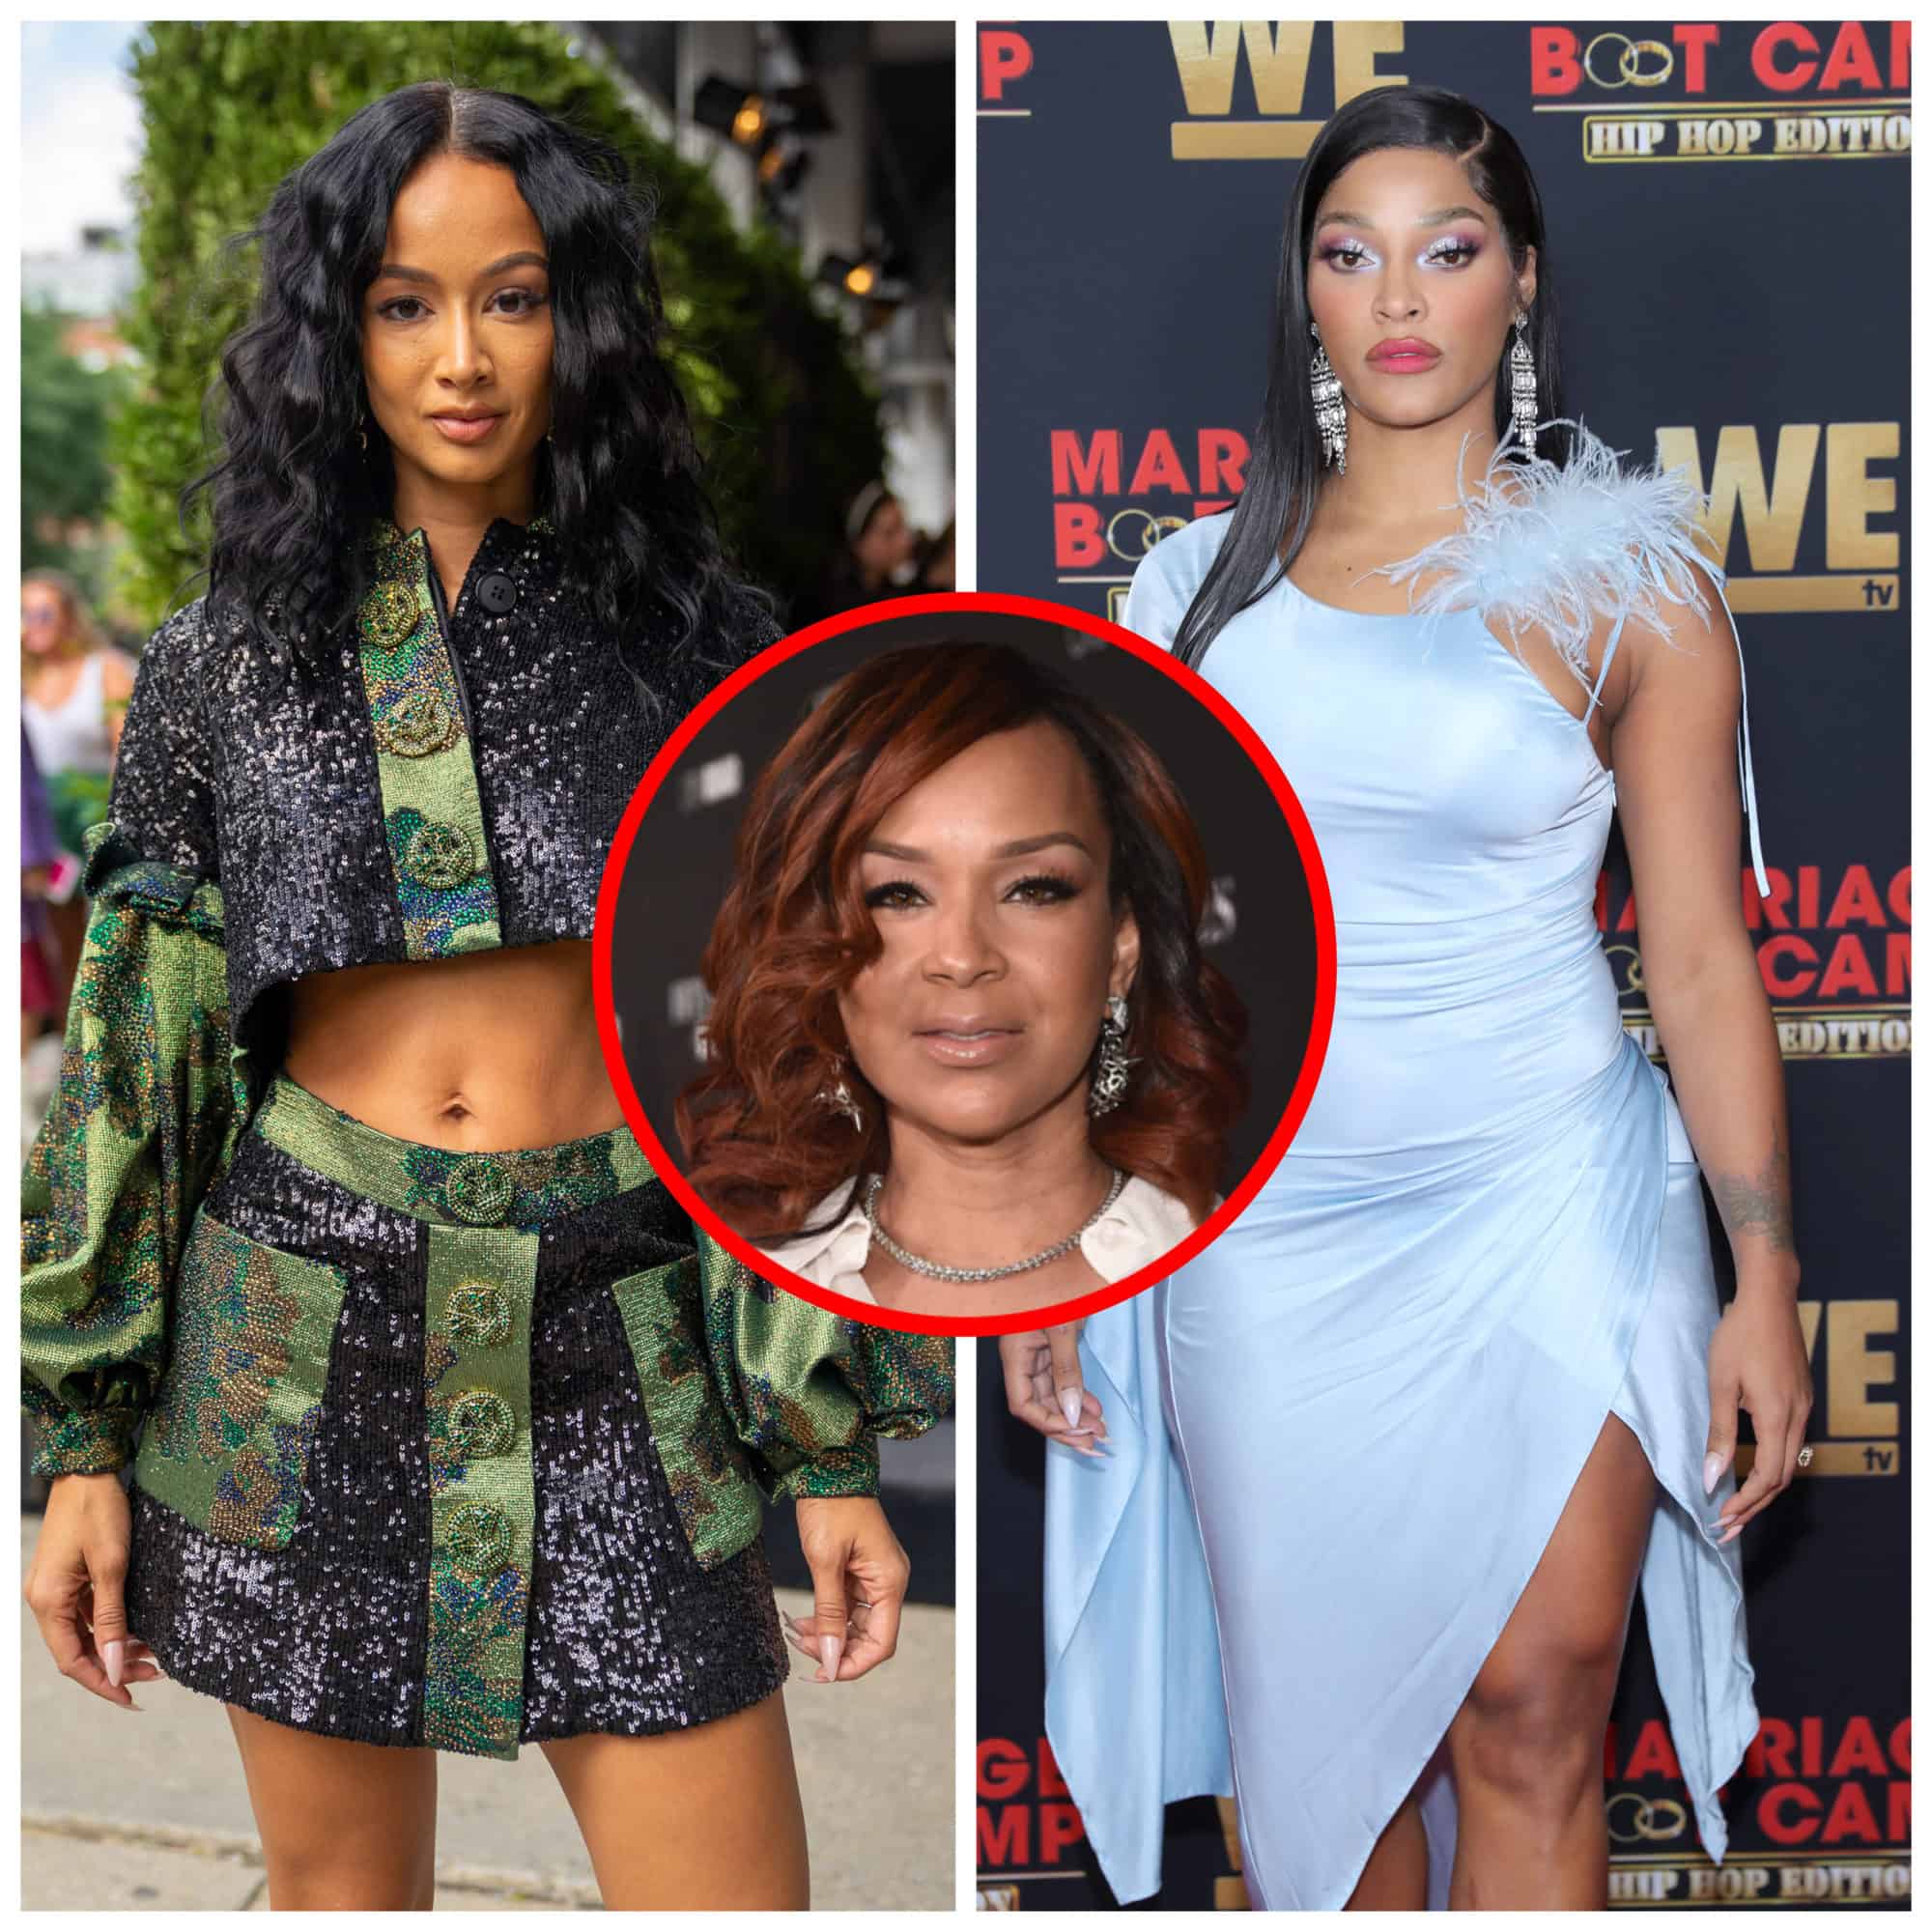 Lisaraye Responds To Draya Michele's Request To Be Cast As “Diamond” In Potential ‘Players Club’ Remake